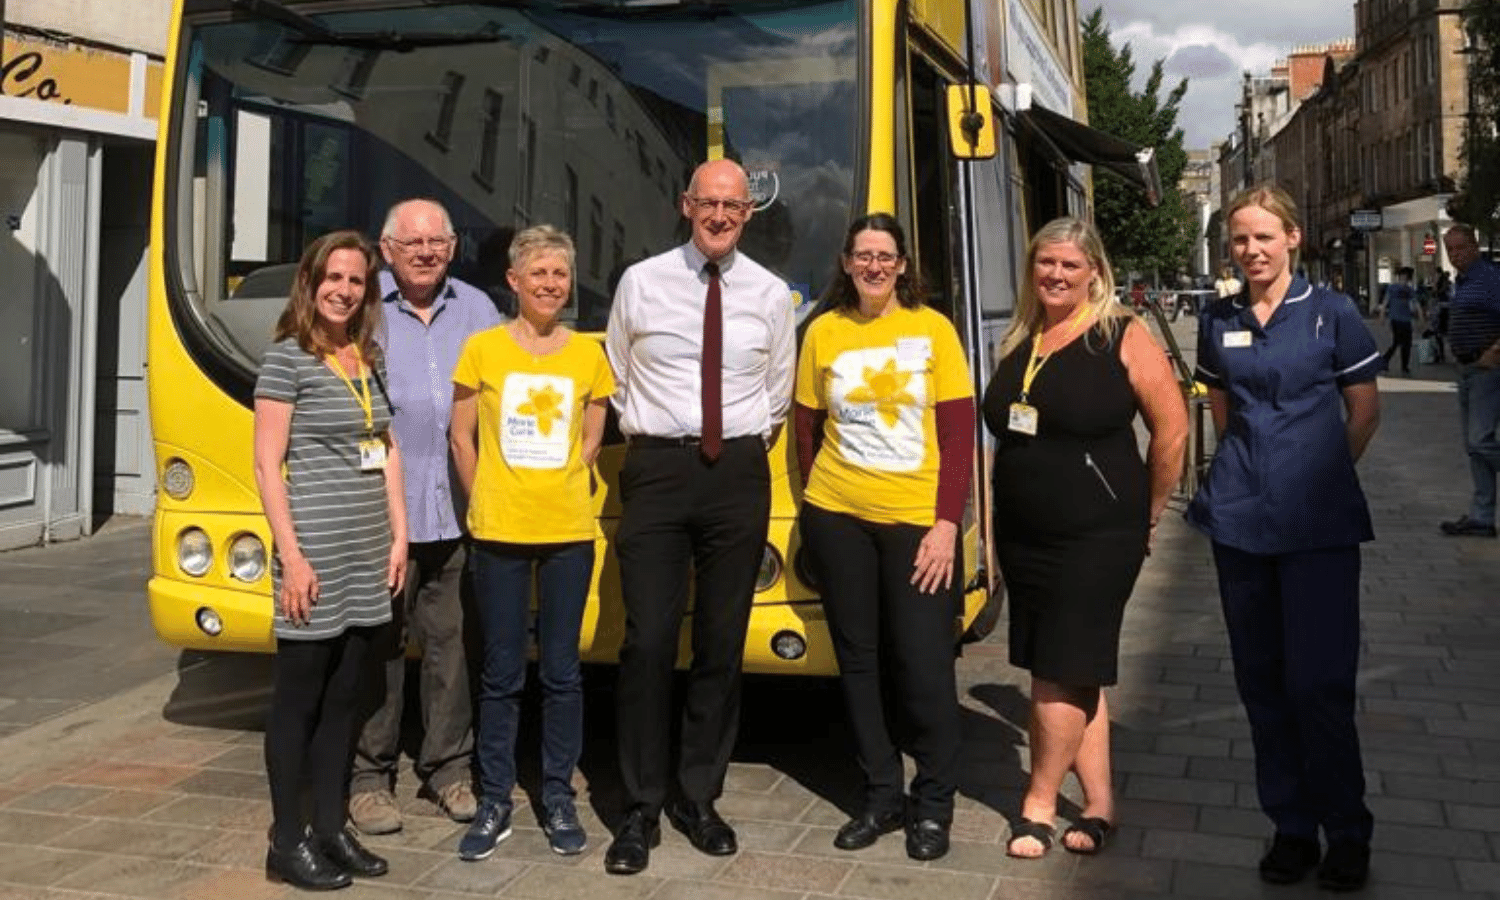 John visits the Marie Curie Bus in Perth to meet with staff and volunteers